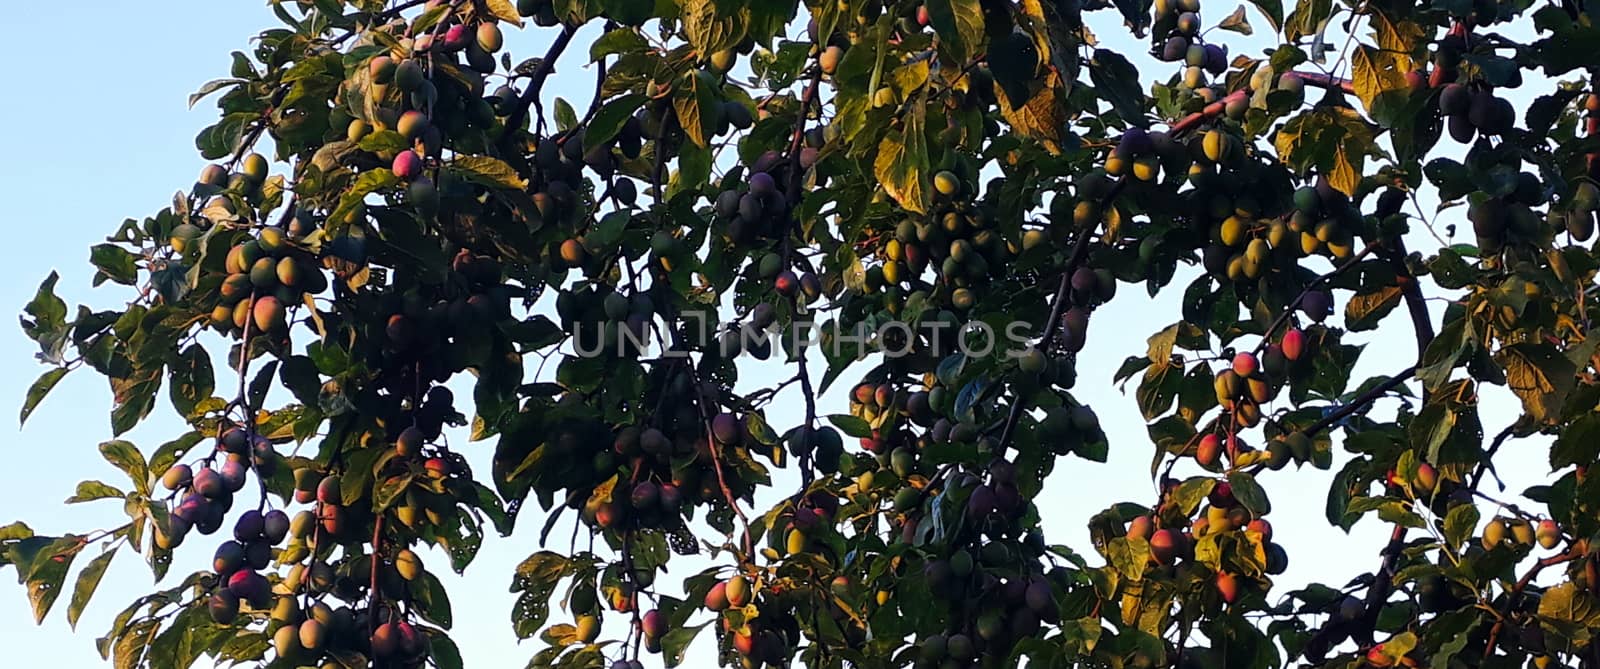 Banner. A plum tree with a lot of unripe plum fruits on it. Plum fruits. by mahirrov